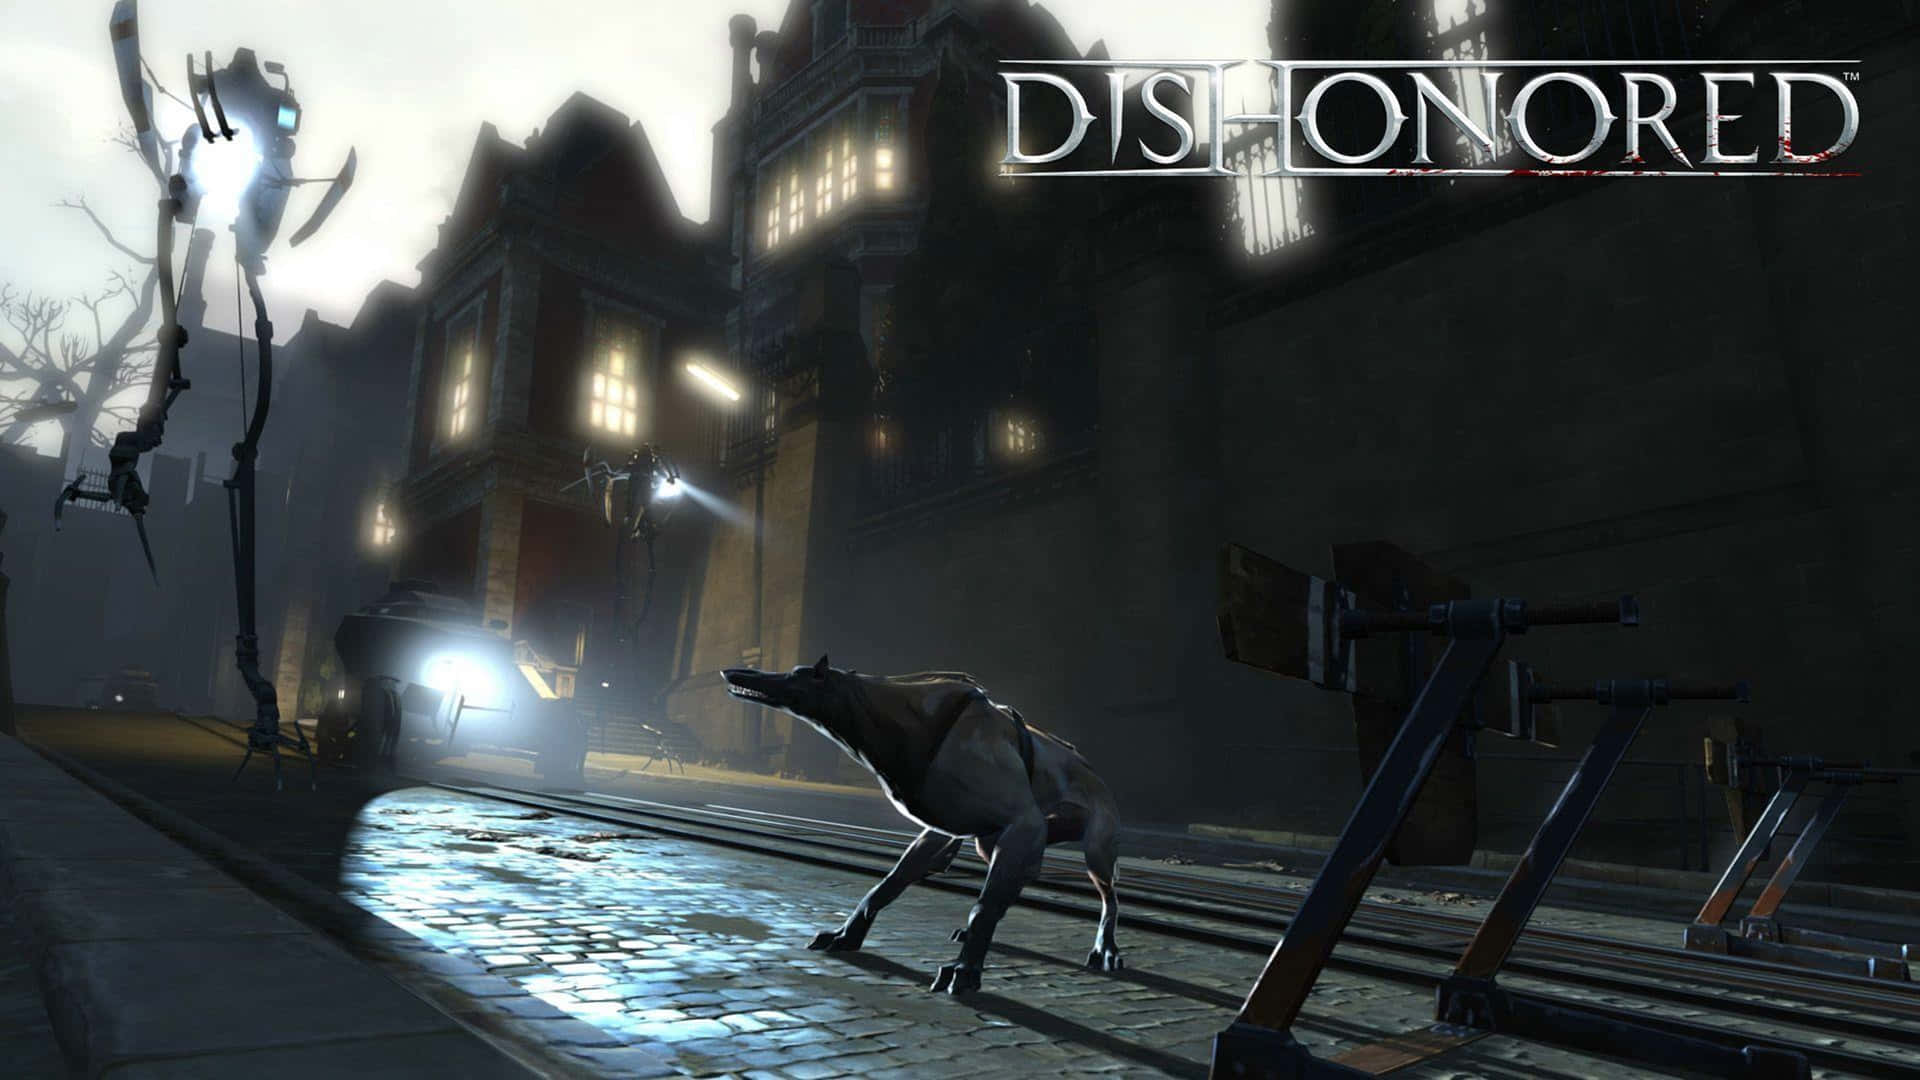 Dishonored - Pc - Pc - Pc - Pc - Pc - Wallpaper